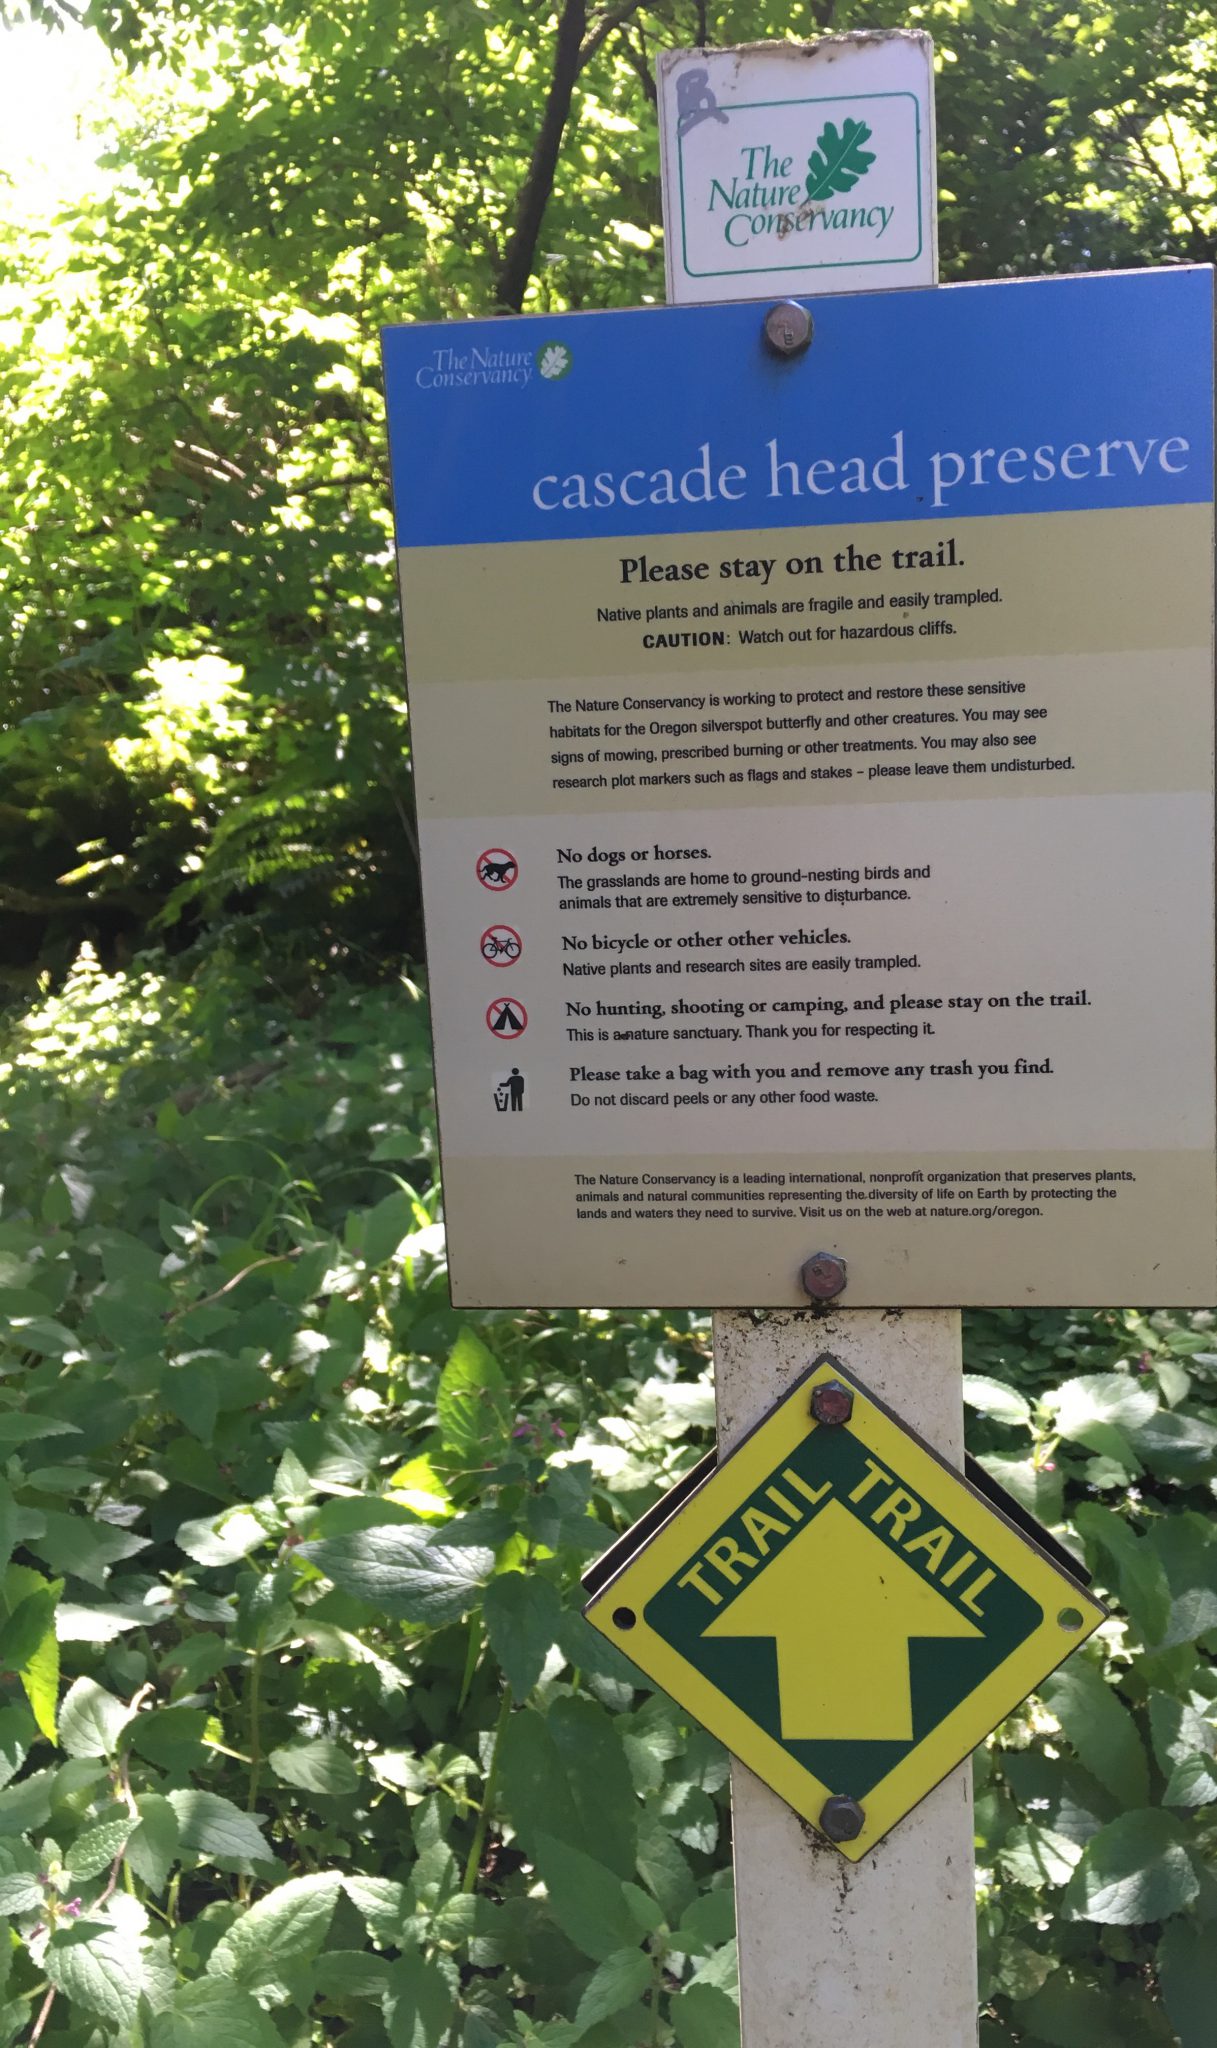 Make sure to follow the rules when hiking up to Cascade Head